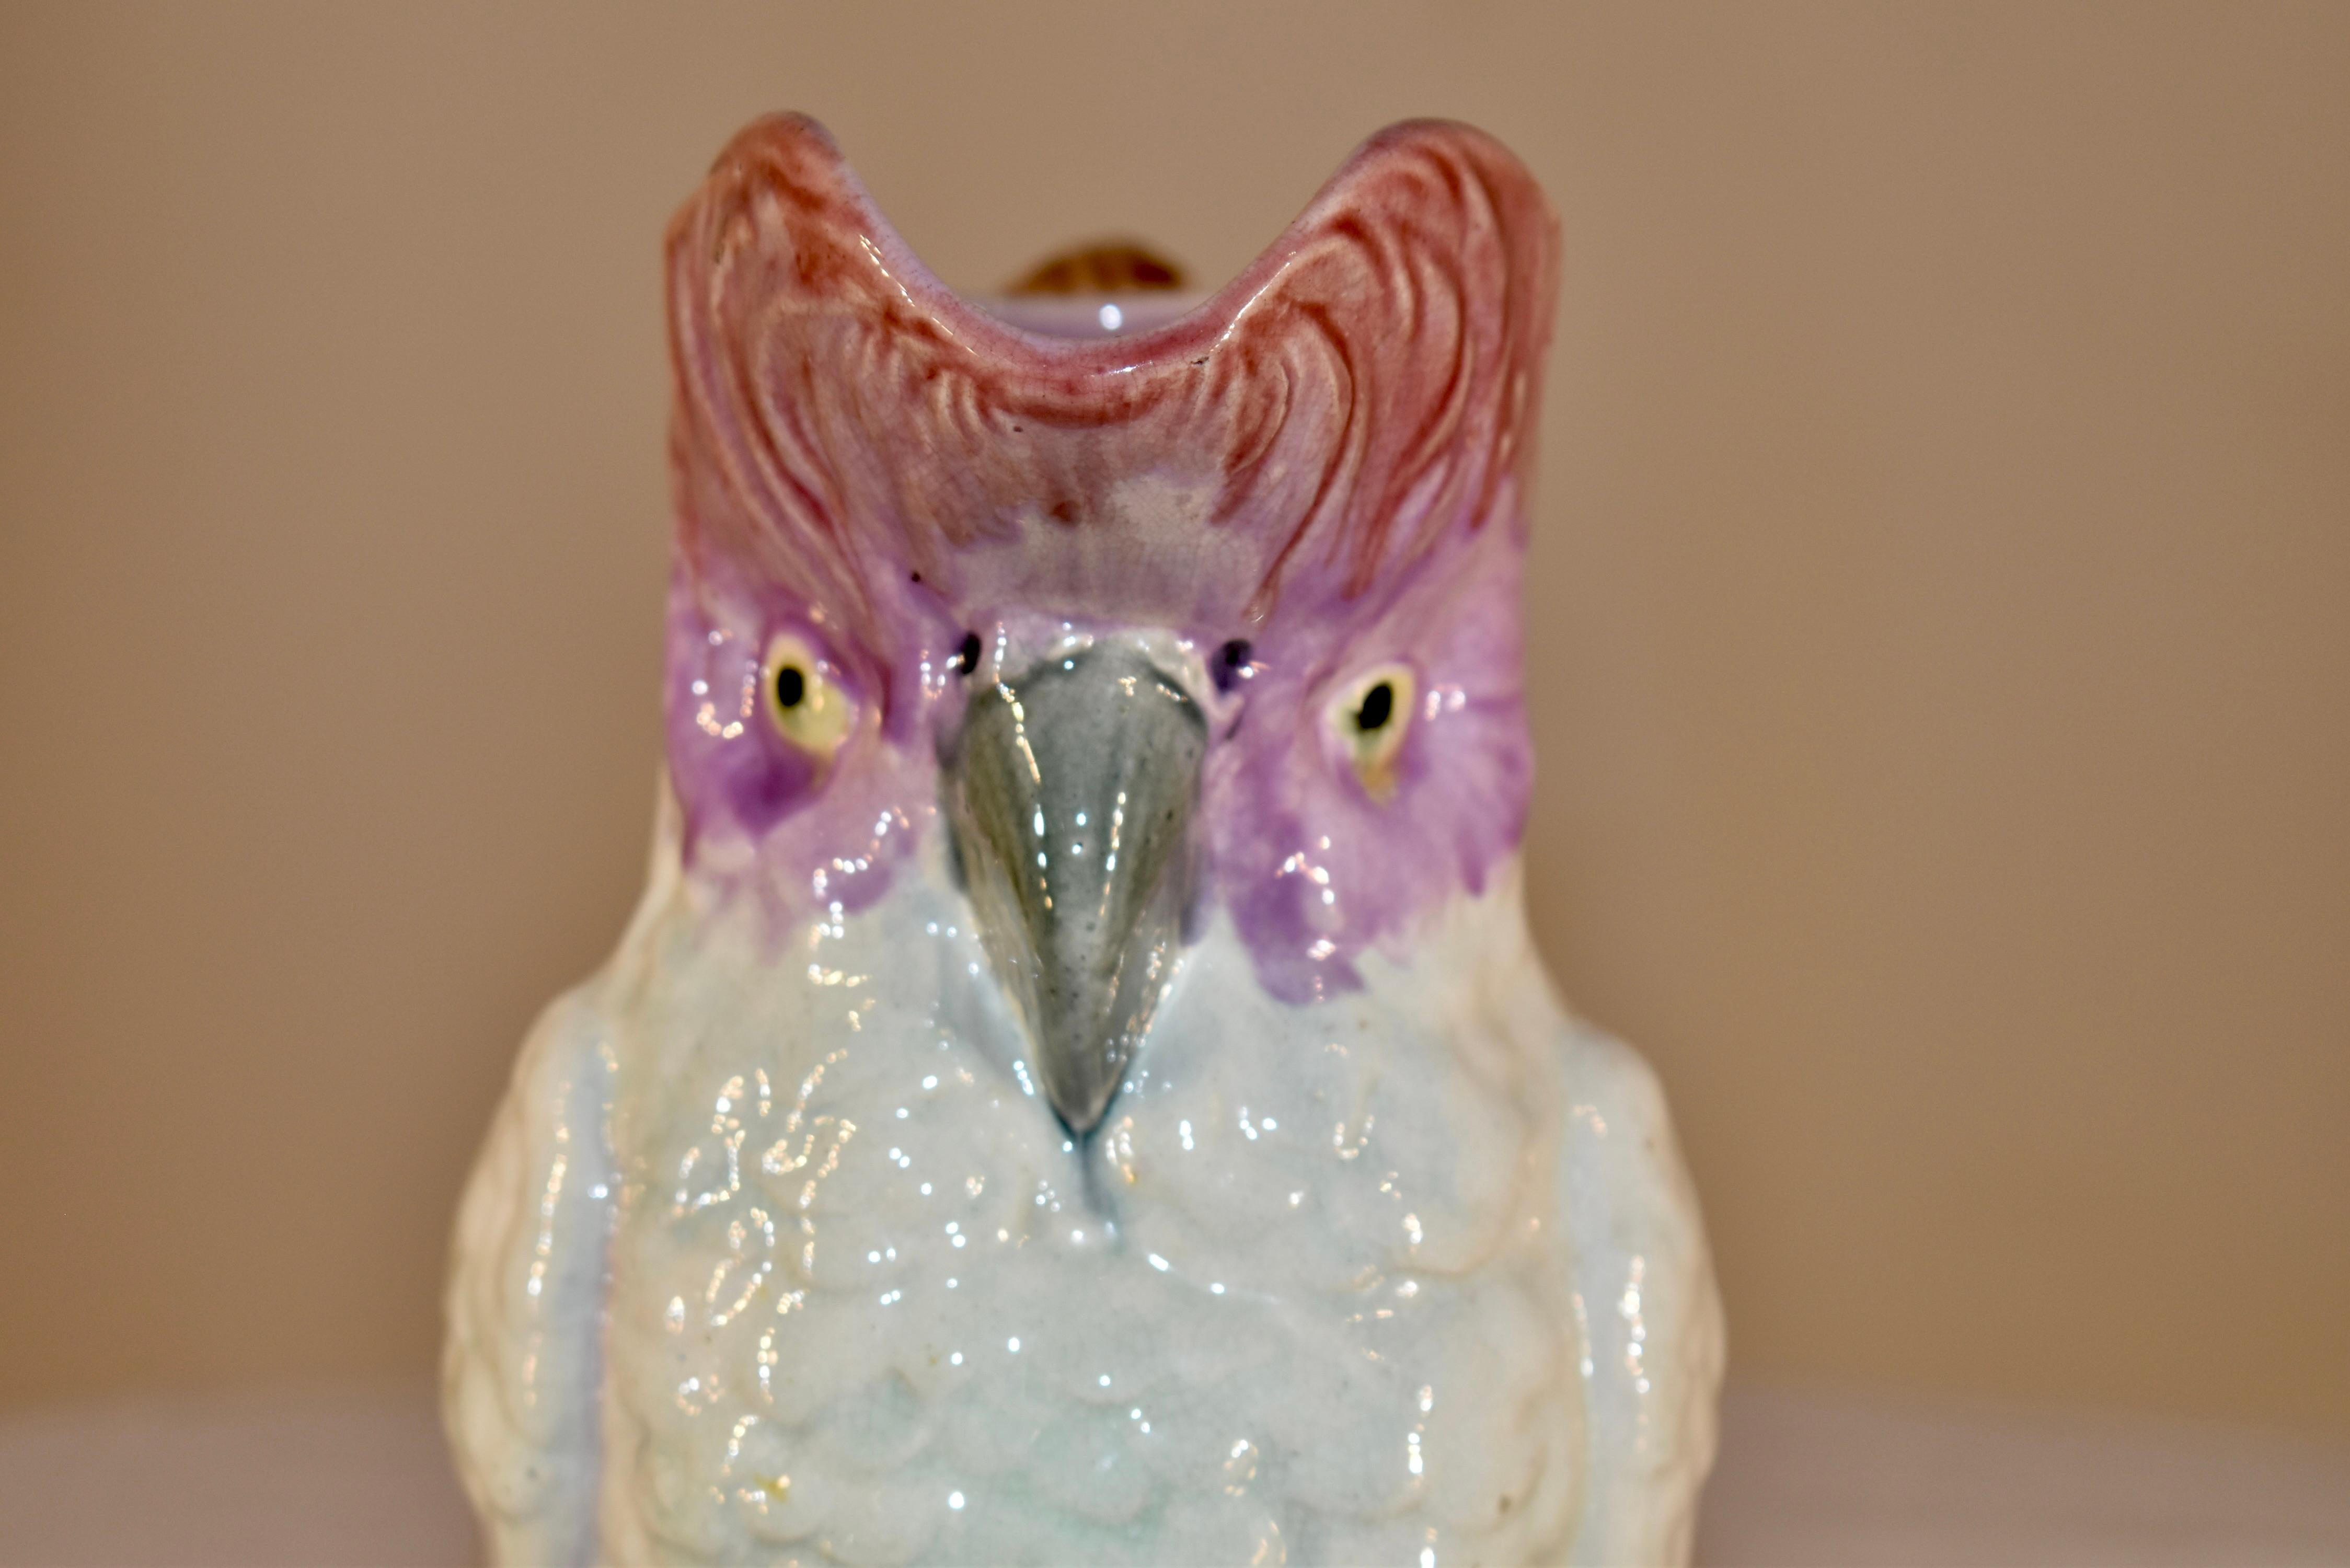 19th Century ceramic majolica pitcher in the form of a cockatoo. The colors are lovely and vibrant. The handle of the pitcher is in the form of bamboo, which is a really interesting detail. Lovely and whimsical.